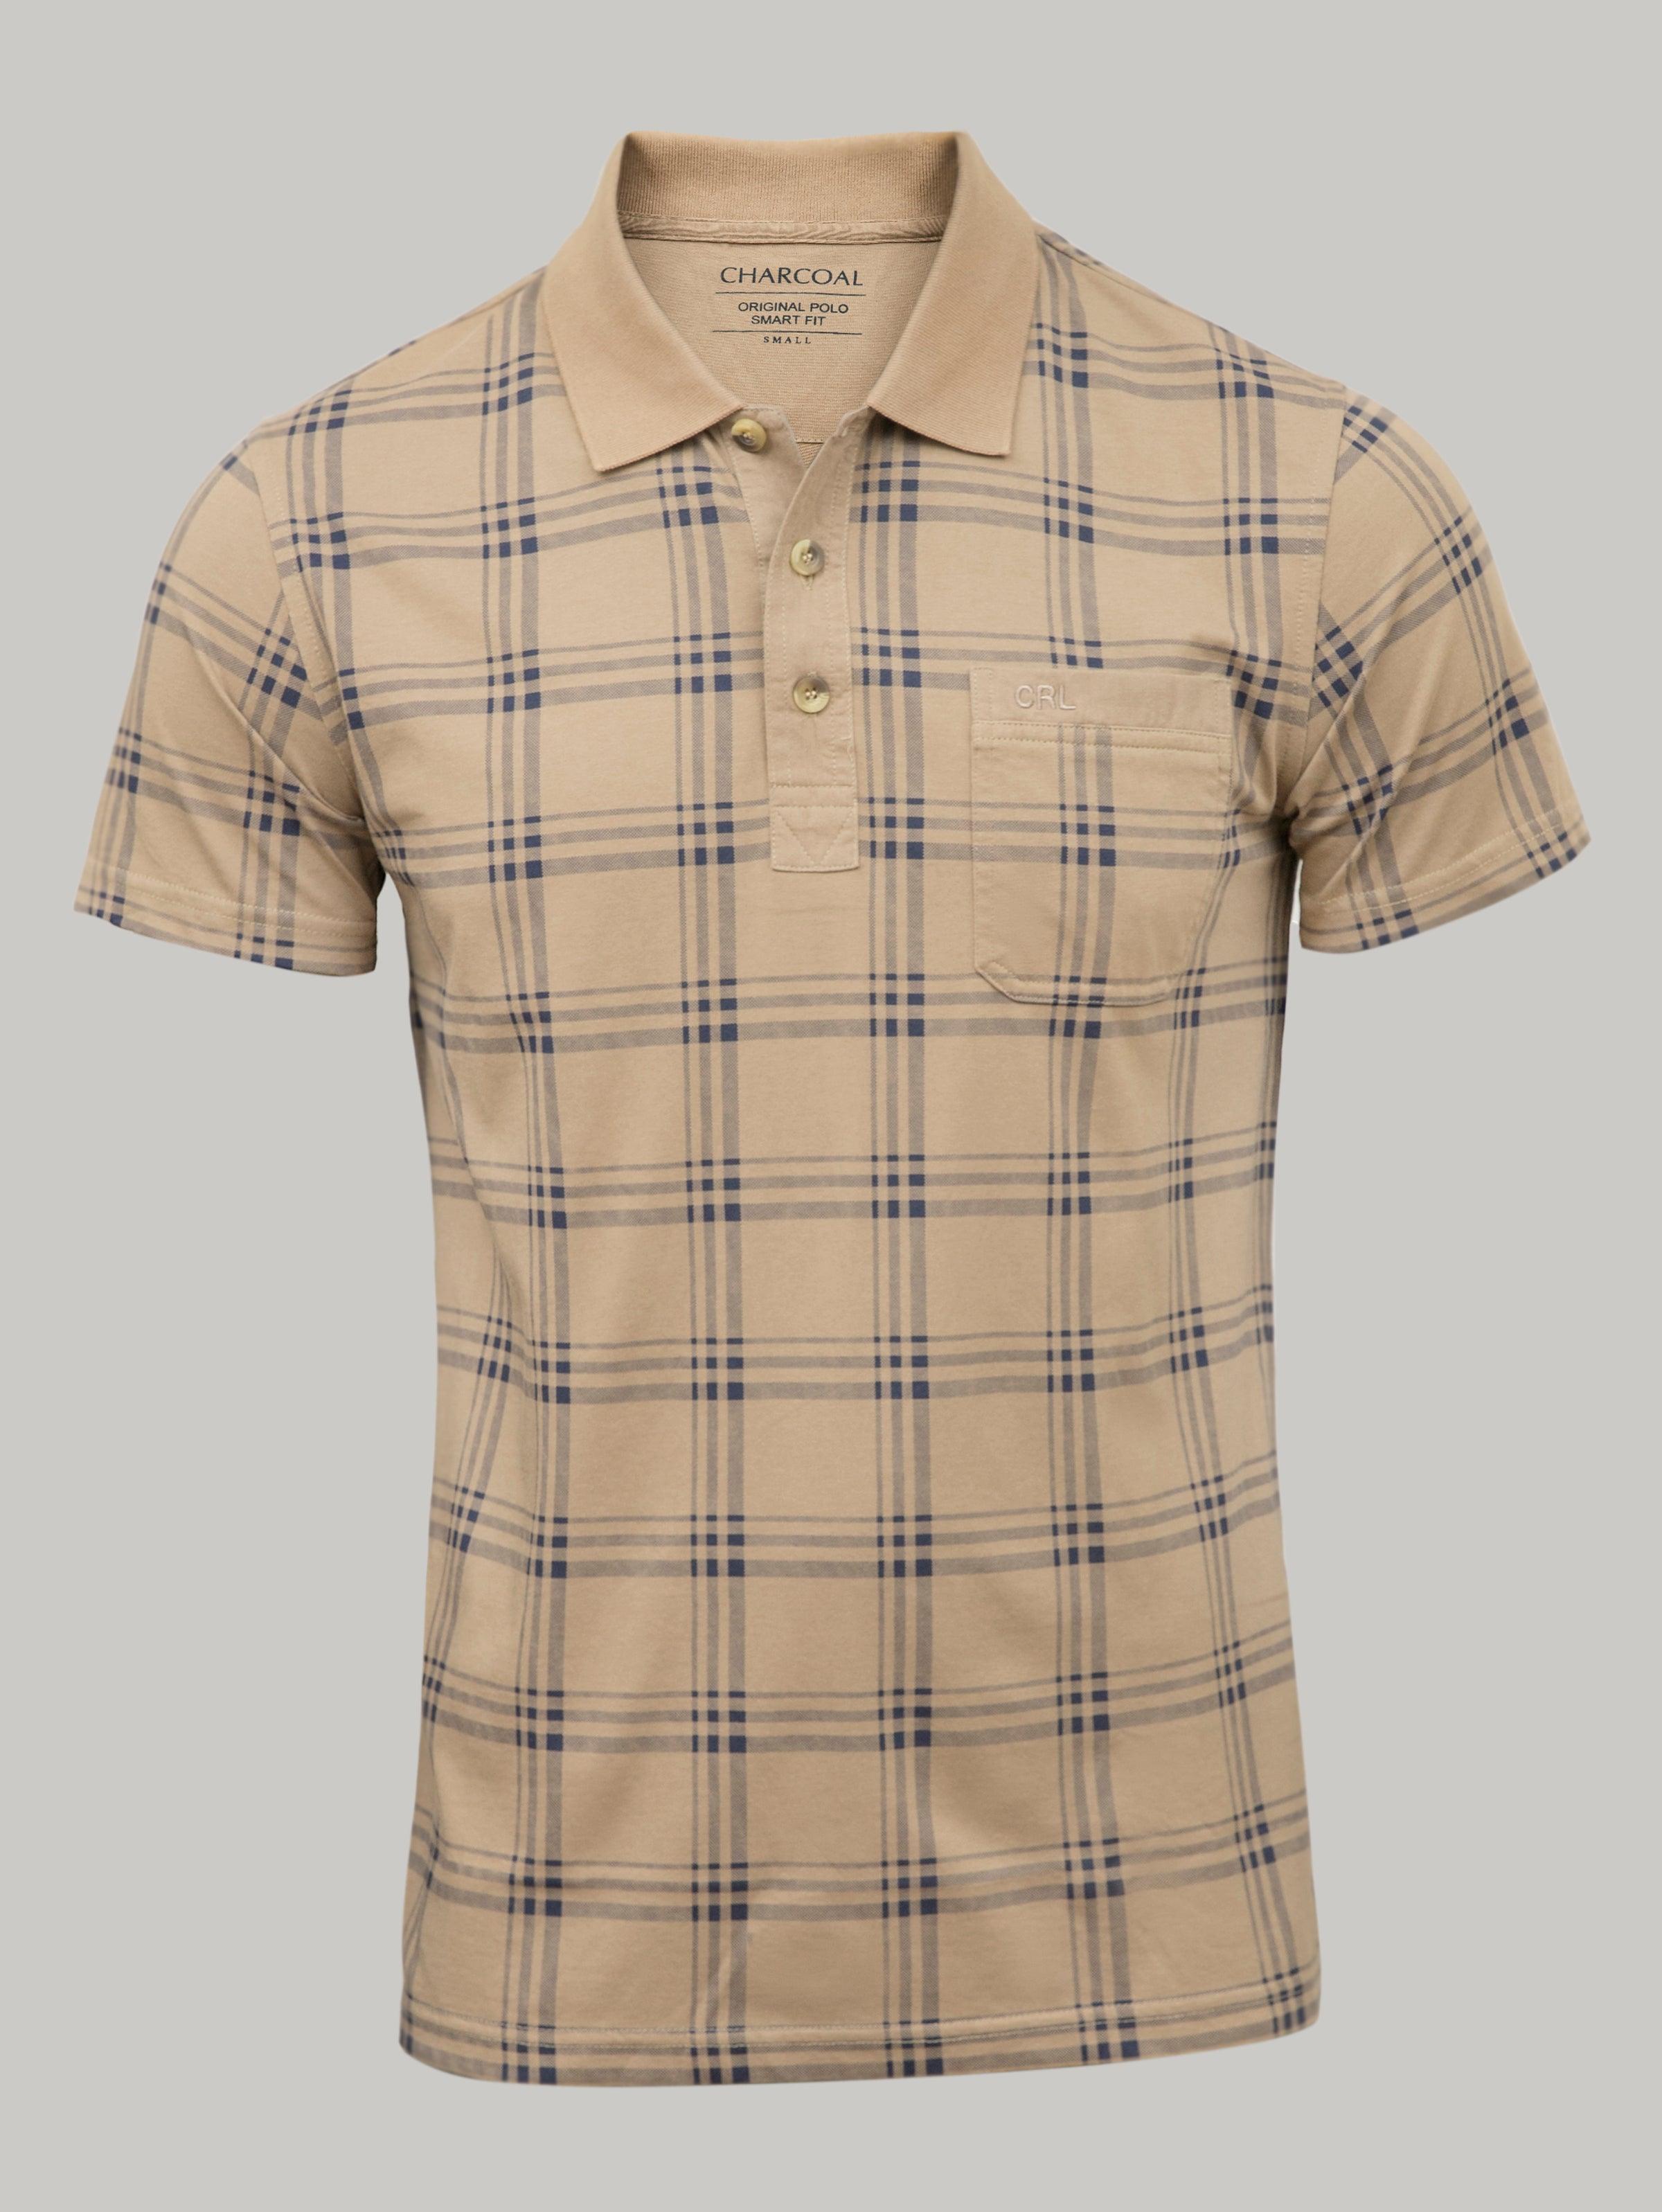 T Shirt Polo Light Brown at Charcoal Clothing